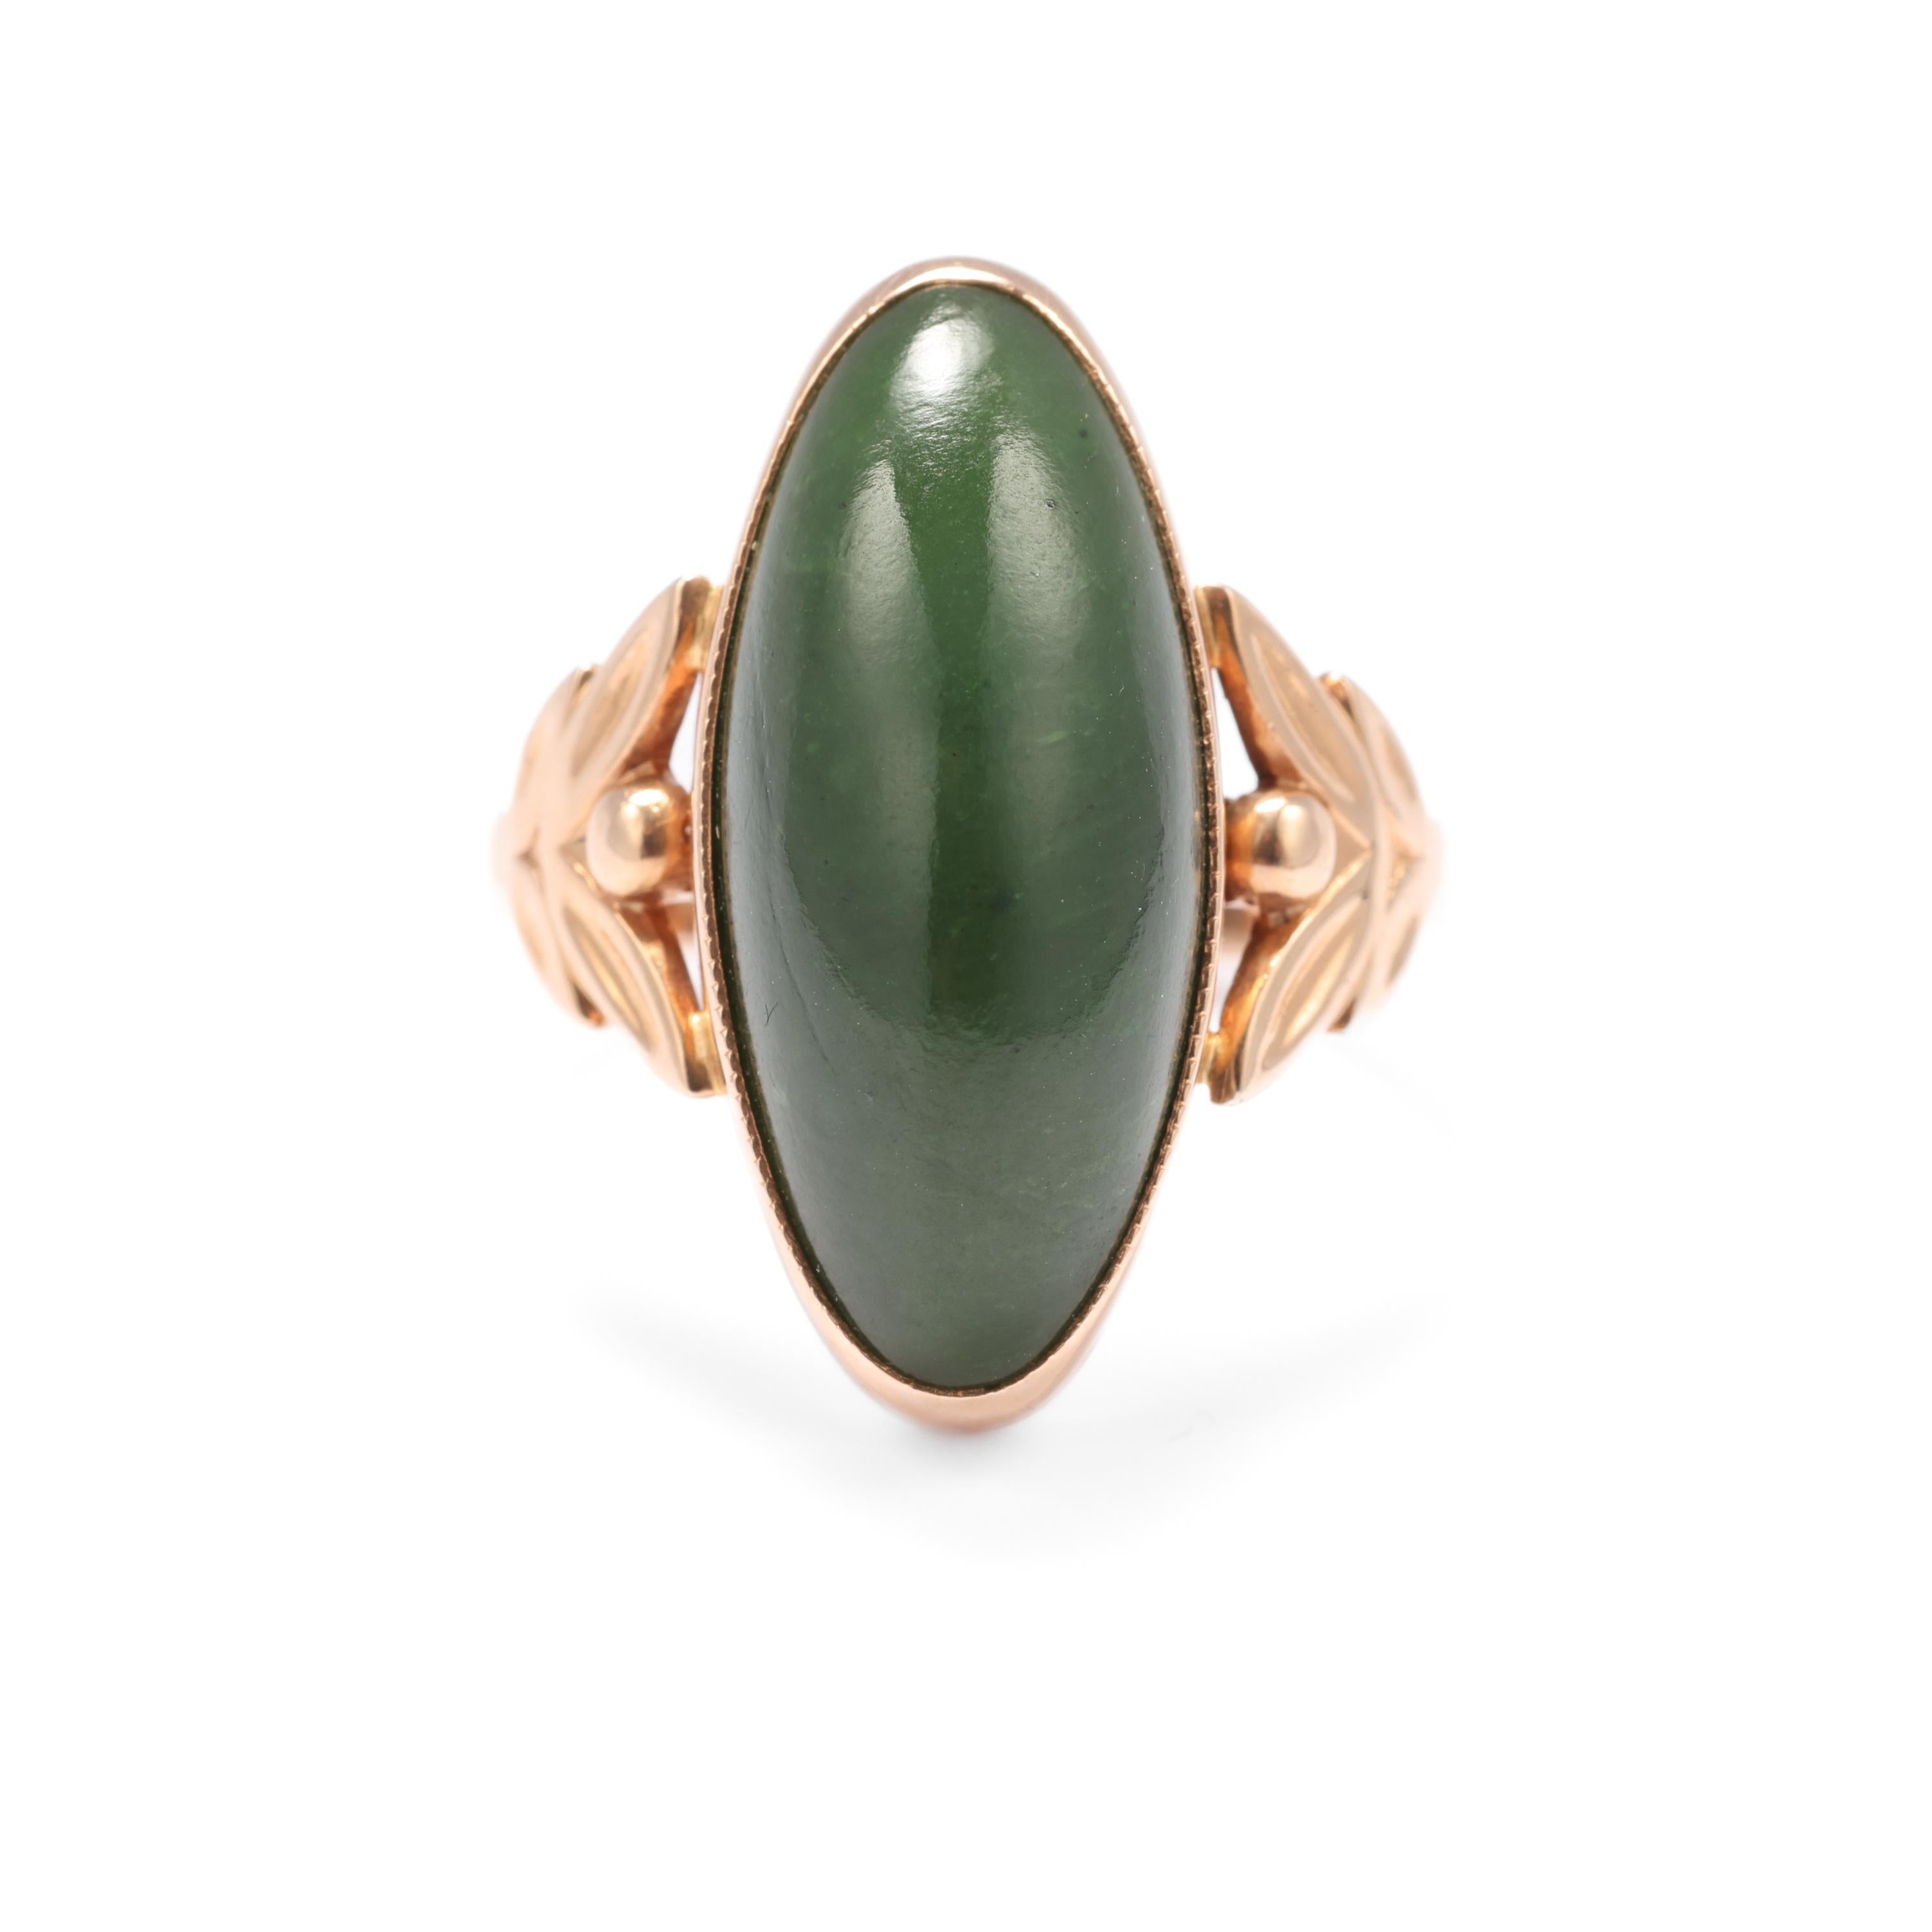 Here we have a gorgeous Art Nouveau style (circa 1970s) nephrite jade ring handmade in Russia from distinctive coppery, 14k rose gold. The elegant, lengthy navette cabochon measures approximately 22mm x 9mm and the ring rises off the finger 8.22mm.